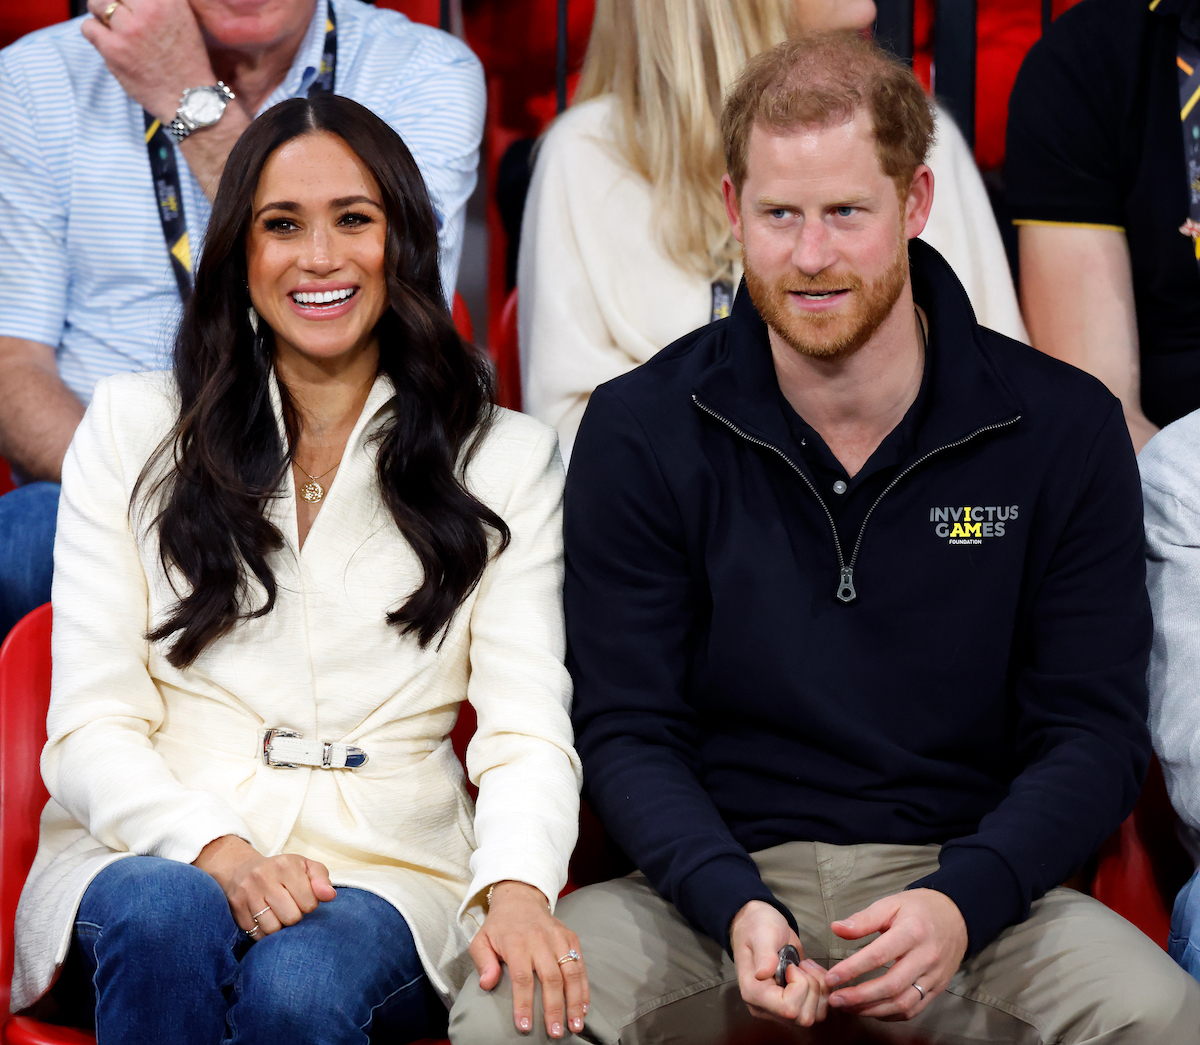 Meghan Markle and Prince Harry sit next to each other at an event.